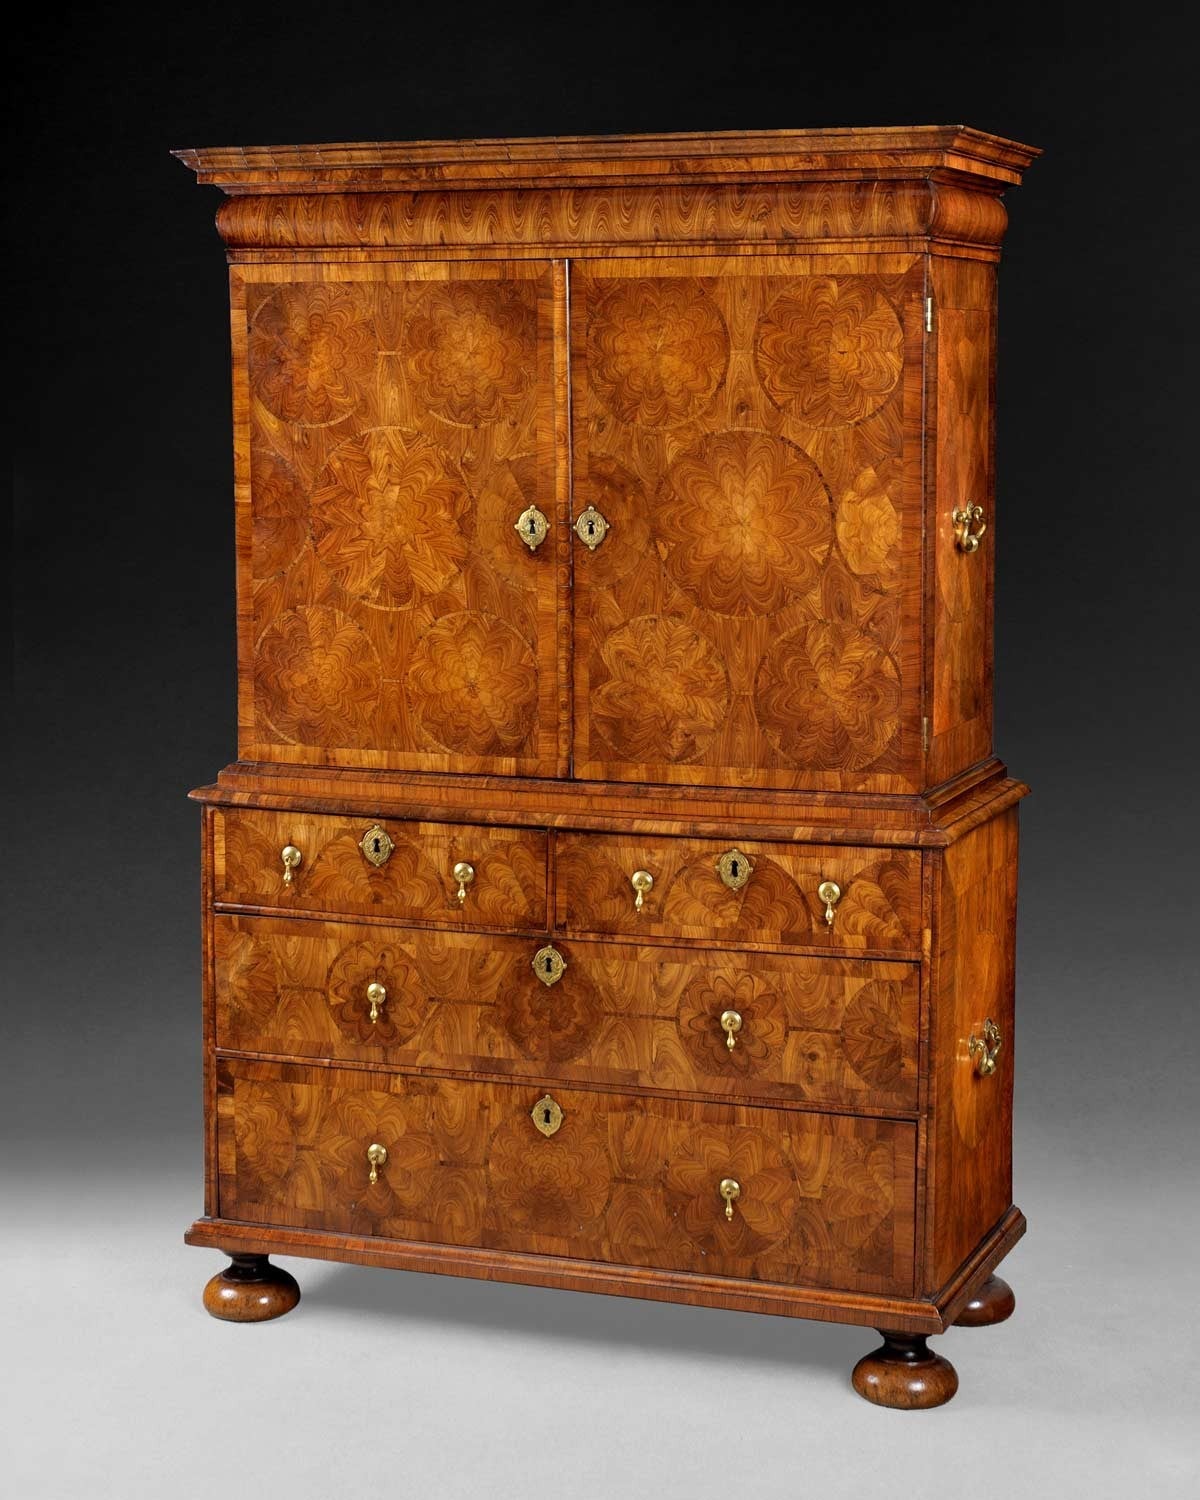 A truly exceptional early William and Mary period Oyster kingwood parquetry inlaid two-door cabinet on chest attributed to Thomas Pistor of London. The top of this piece has a shaped moulding above a flat moulded section and a cavetto moulding